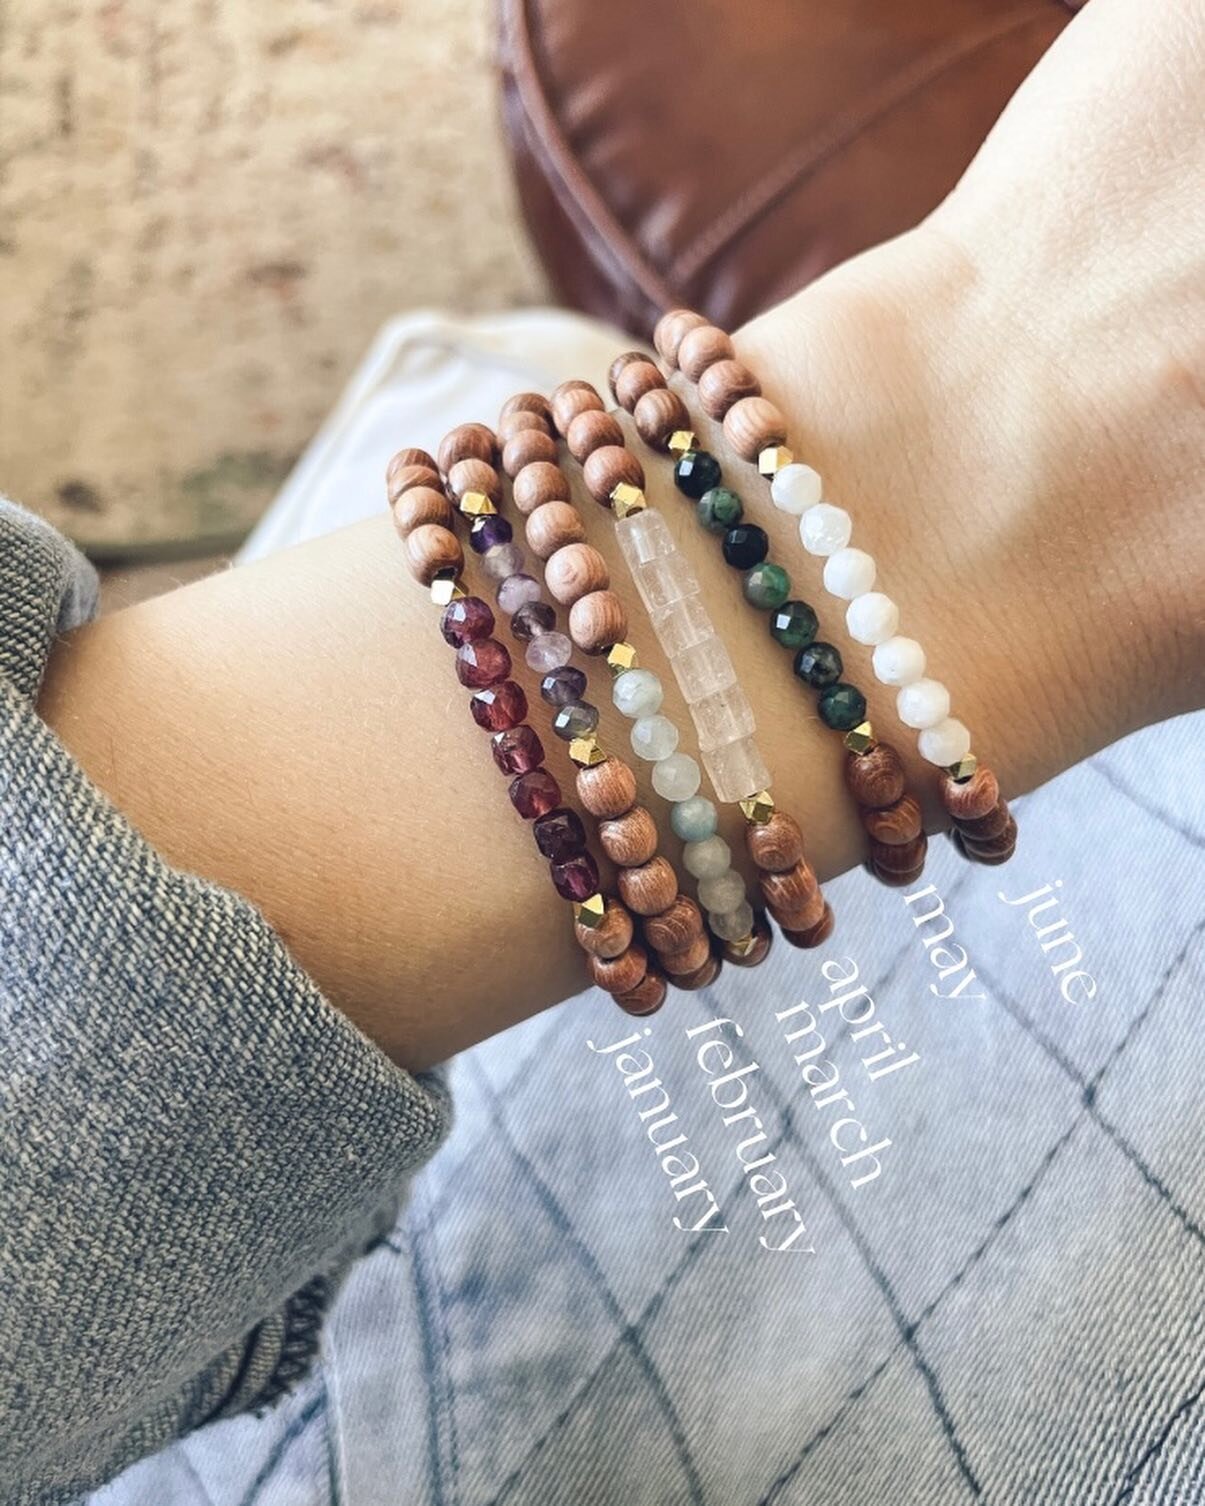 💎Birthstones are here!💎

Today is a mileSTONE birthday for me, so it seems fitting to release these today 🥰🎂 Bands are made with 4mm rosewood beads, genuine gemstones, and gold plated accents! 

January - Garnet 
February - Amethyst
March - Aquam